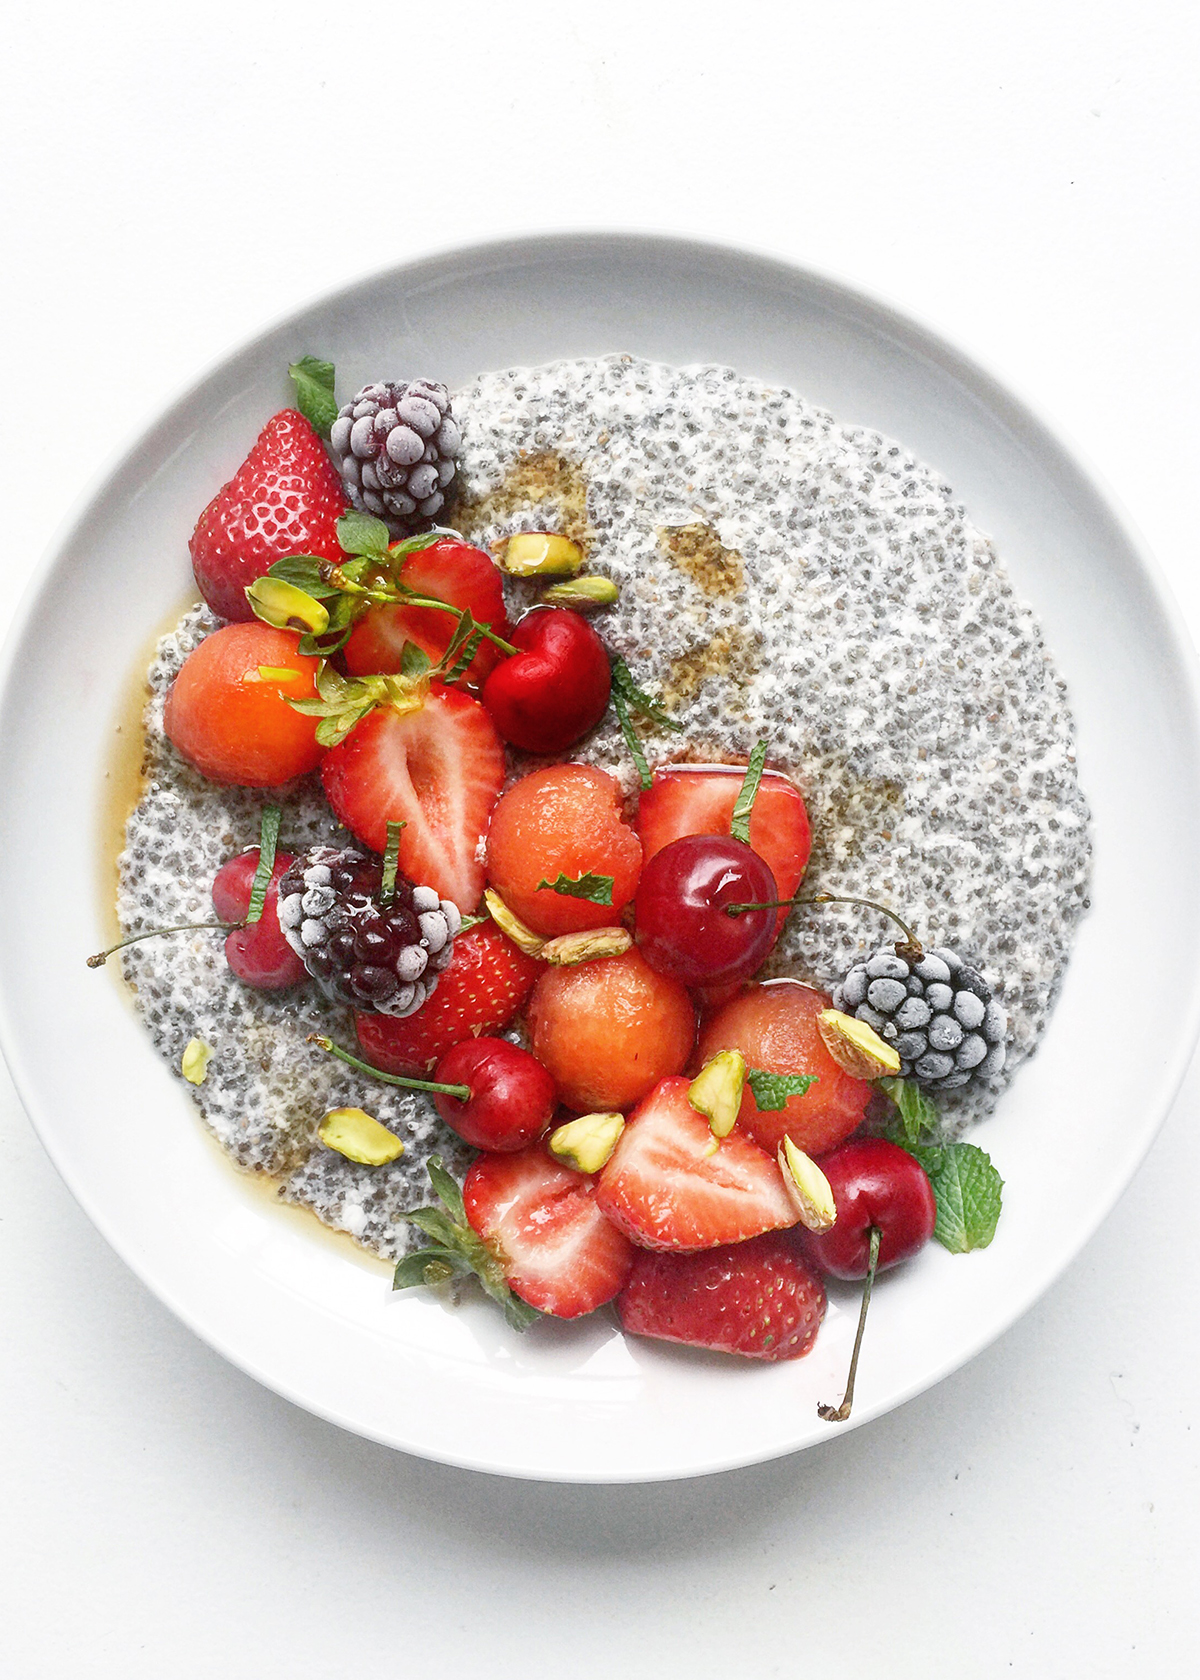 chia seed pudding with strawberries and cherries